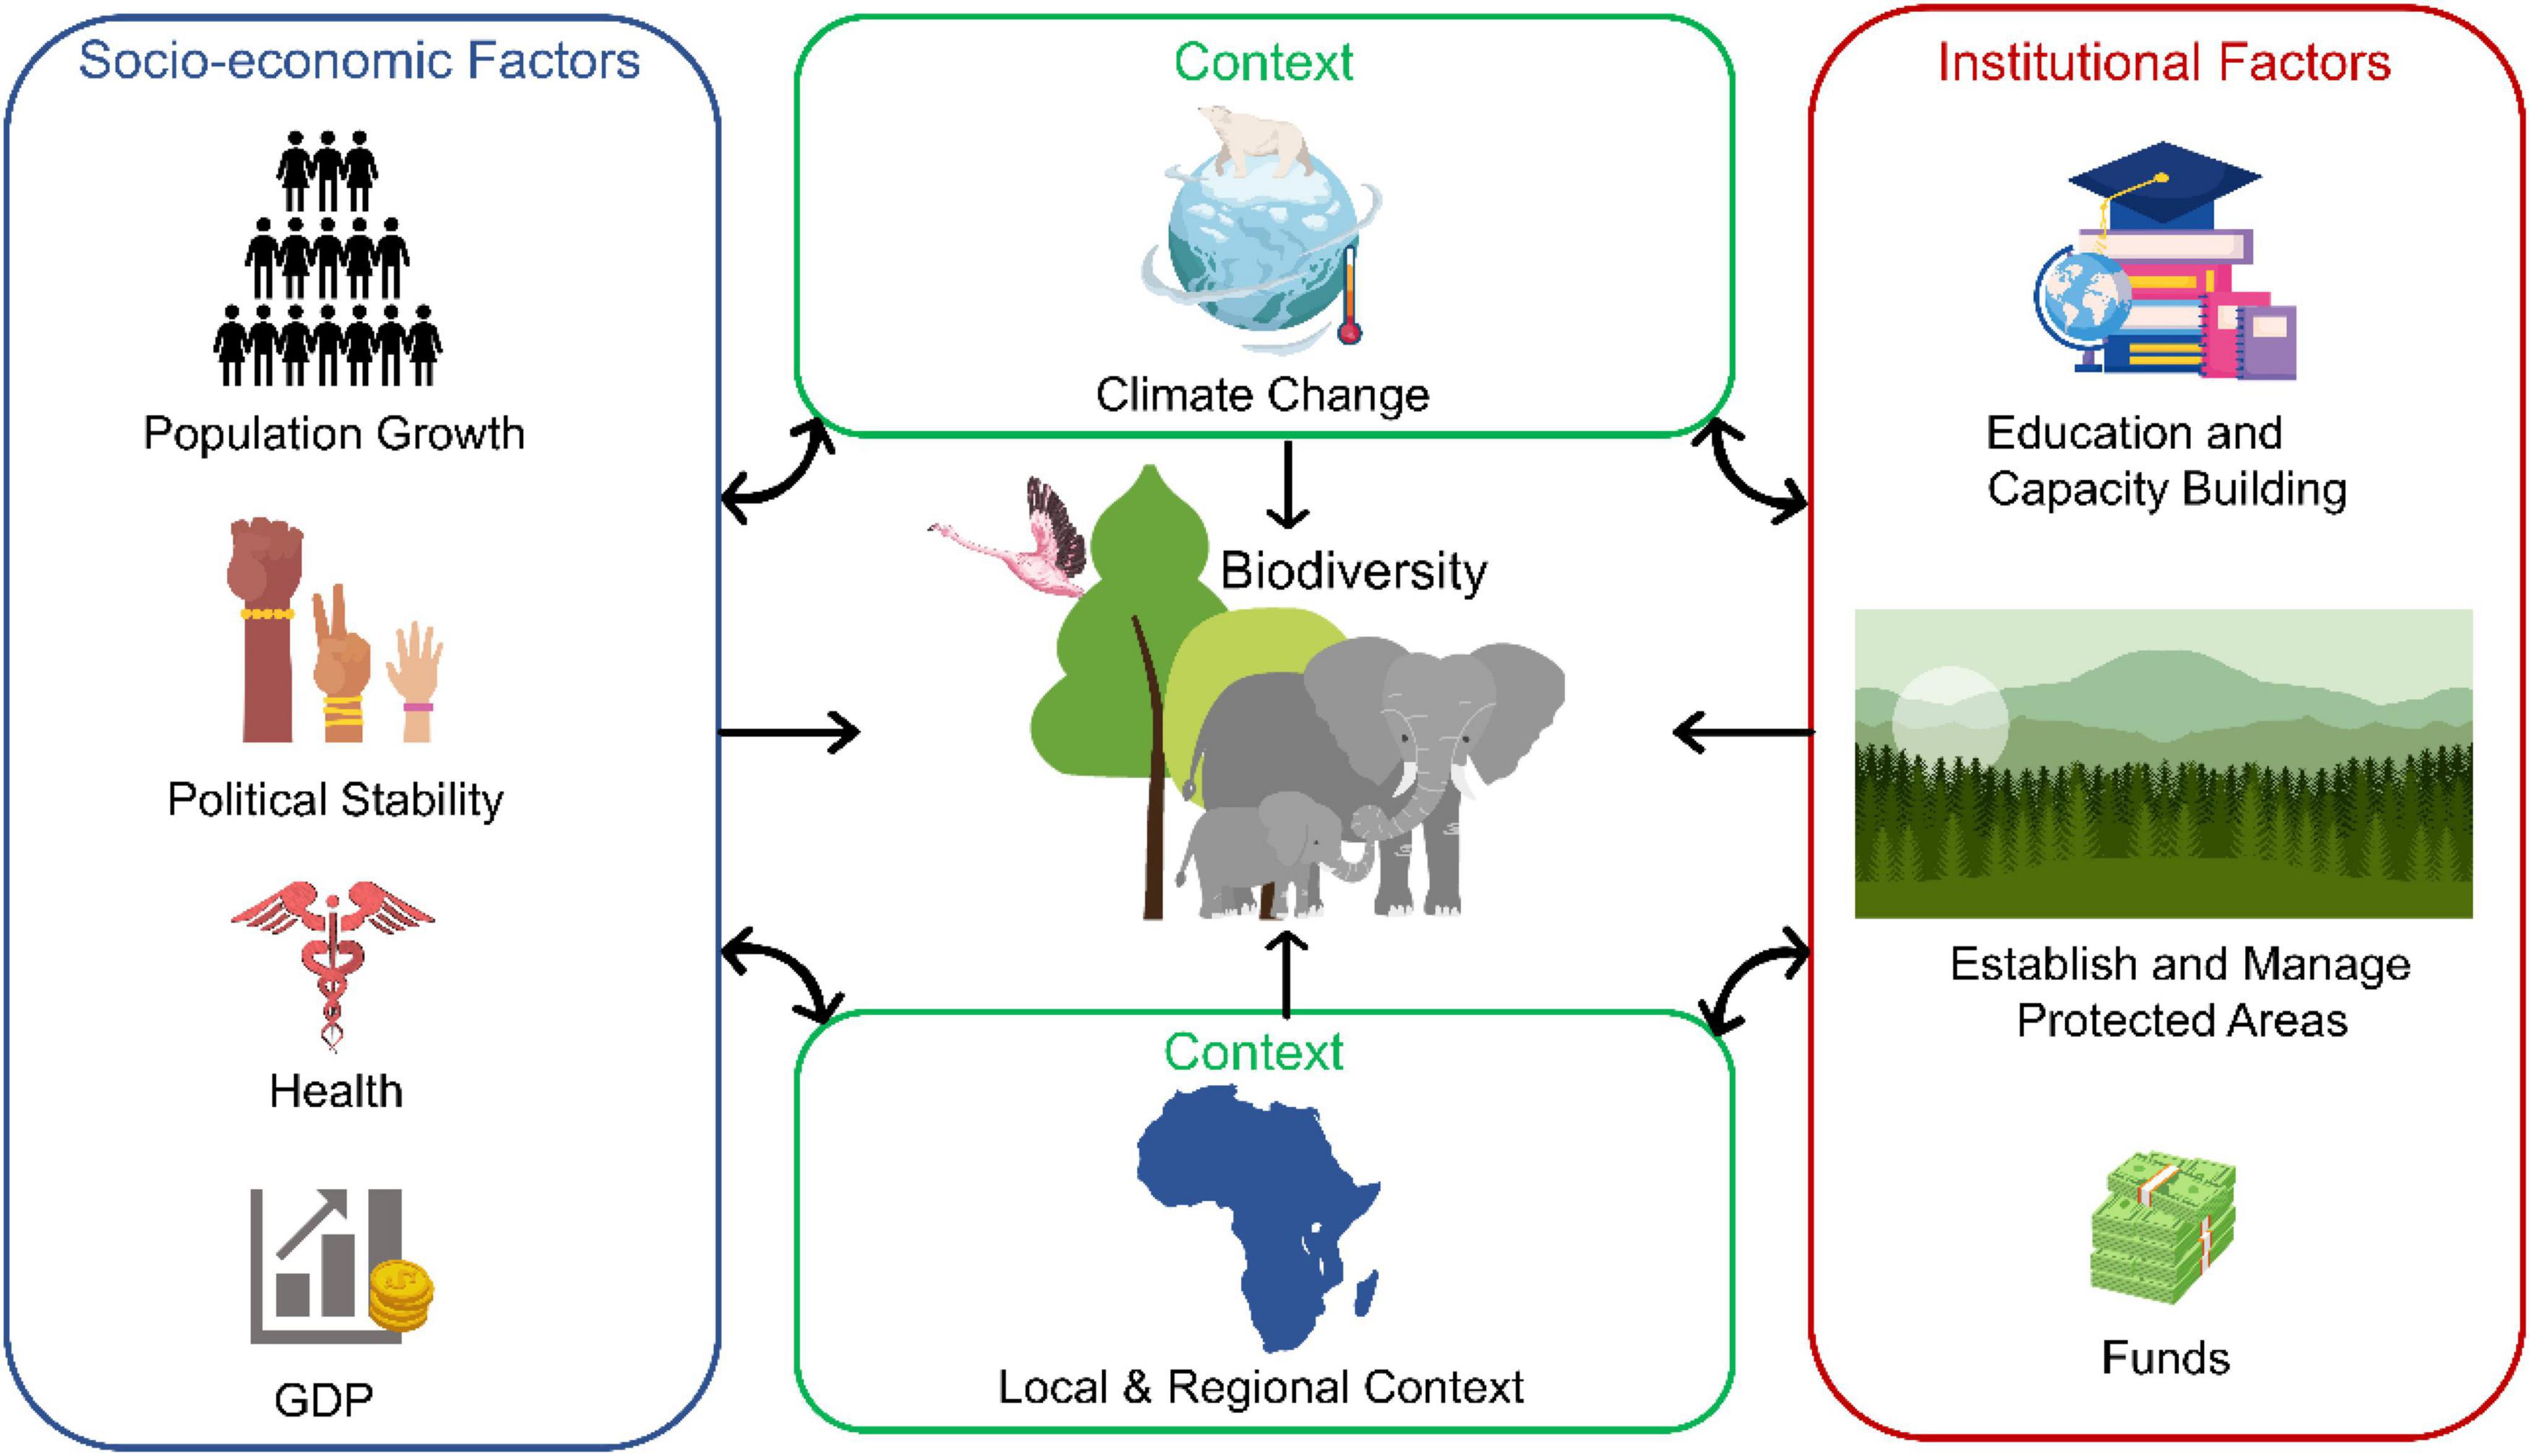 Urbanization, climate and species traits shape mammal communities from  local to continental scales